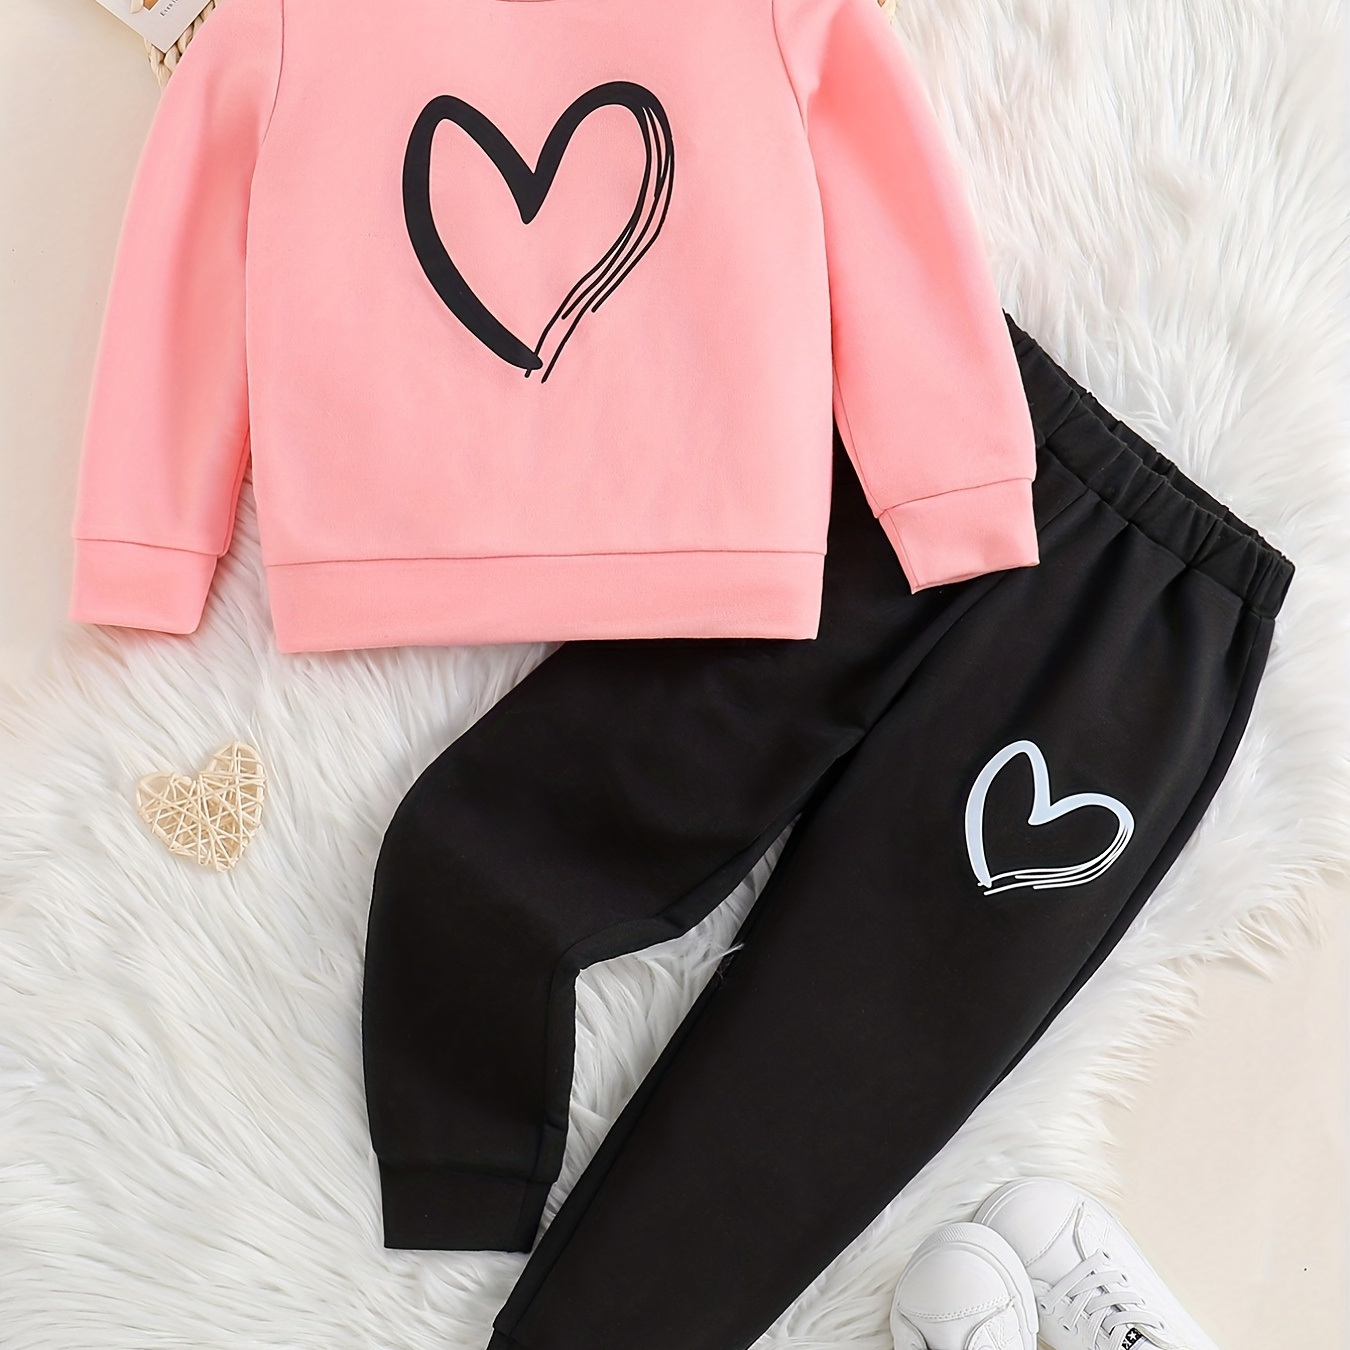 

Girl's 2pcs, Sweatshirt & Sweatpants Set, Love Heart Print Long Sleeve Top, Casual Outfits, Kids Clothes For Spring Fall